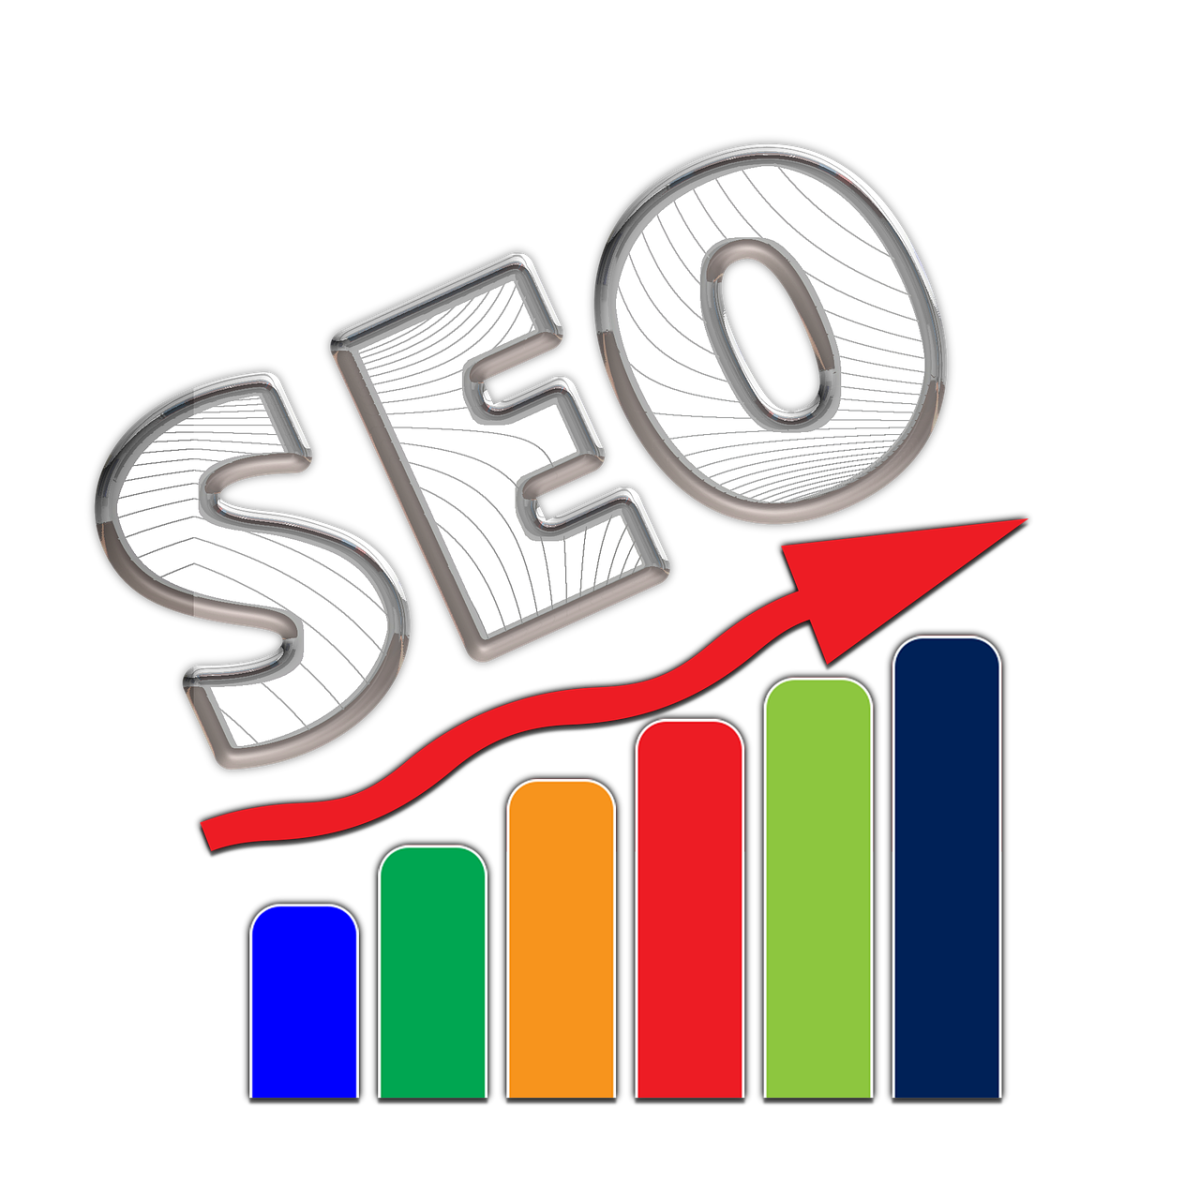 What Is Seo? and What Effect Does It Have on Search Engines?